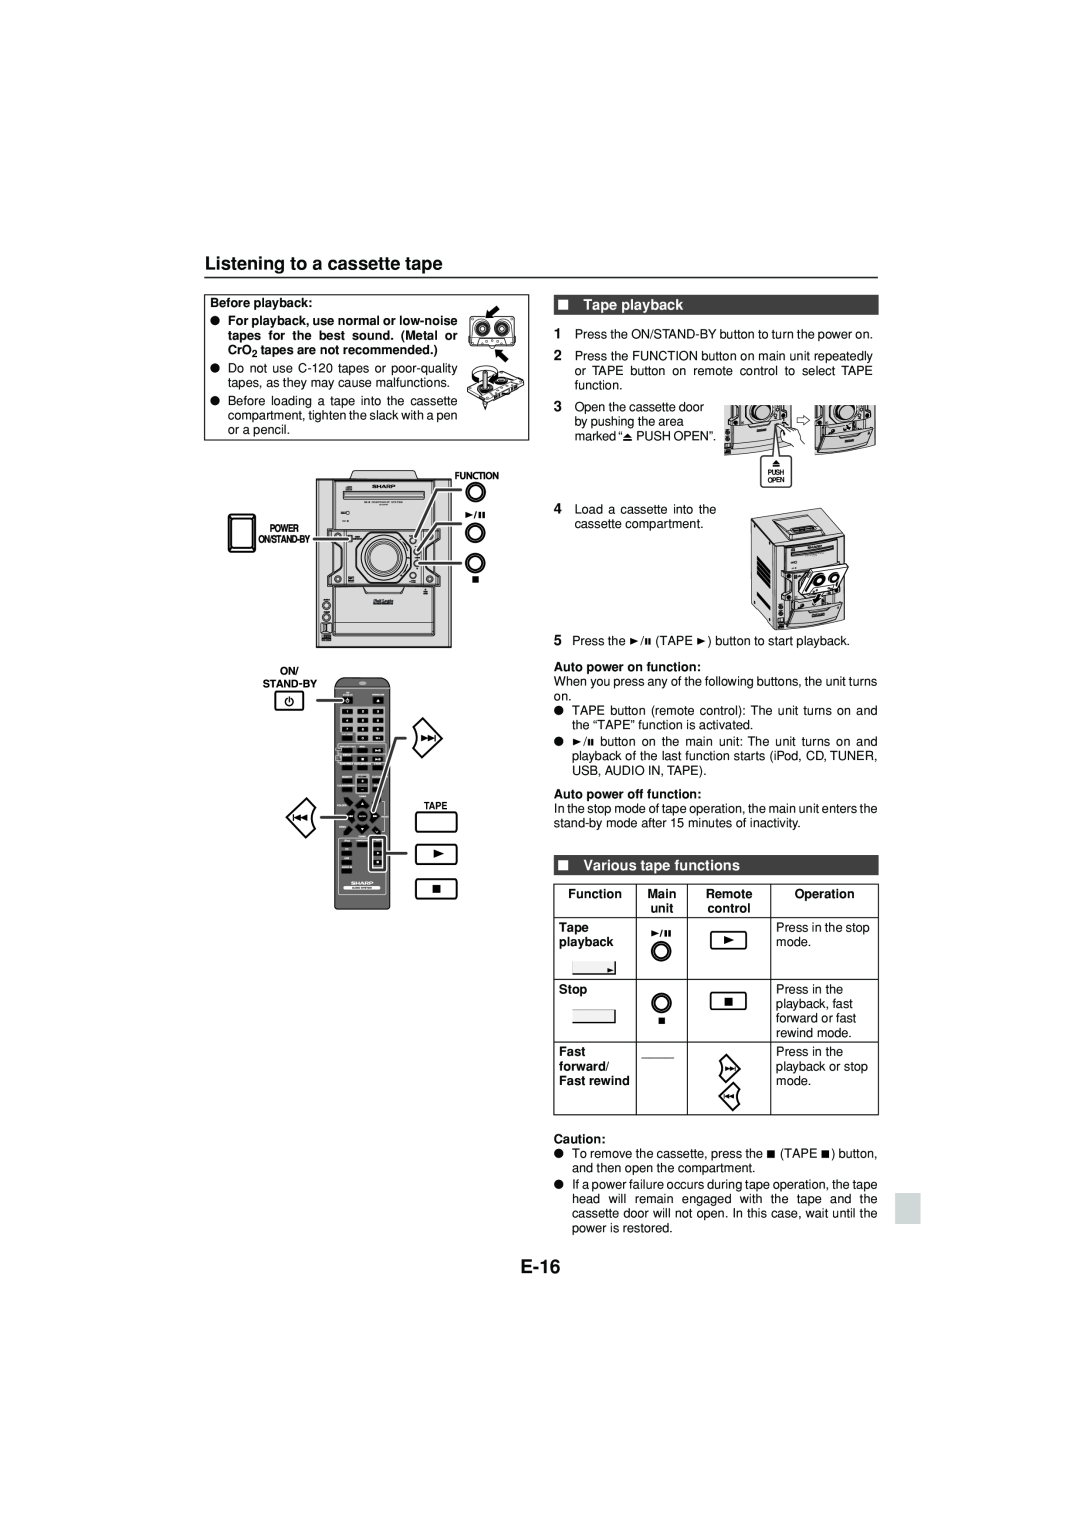 Sony CD-DH790N operation manual E-16, Listening to a cassette tape, Tape playback, Various tape functions 